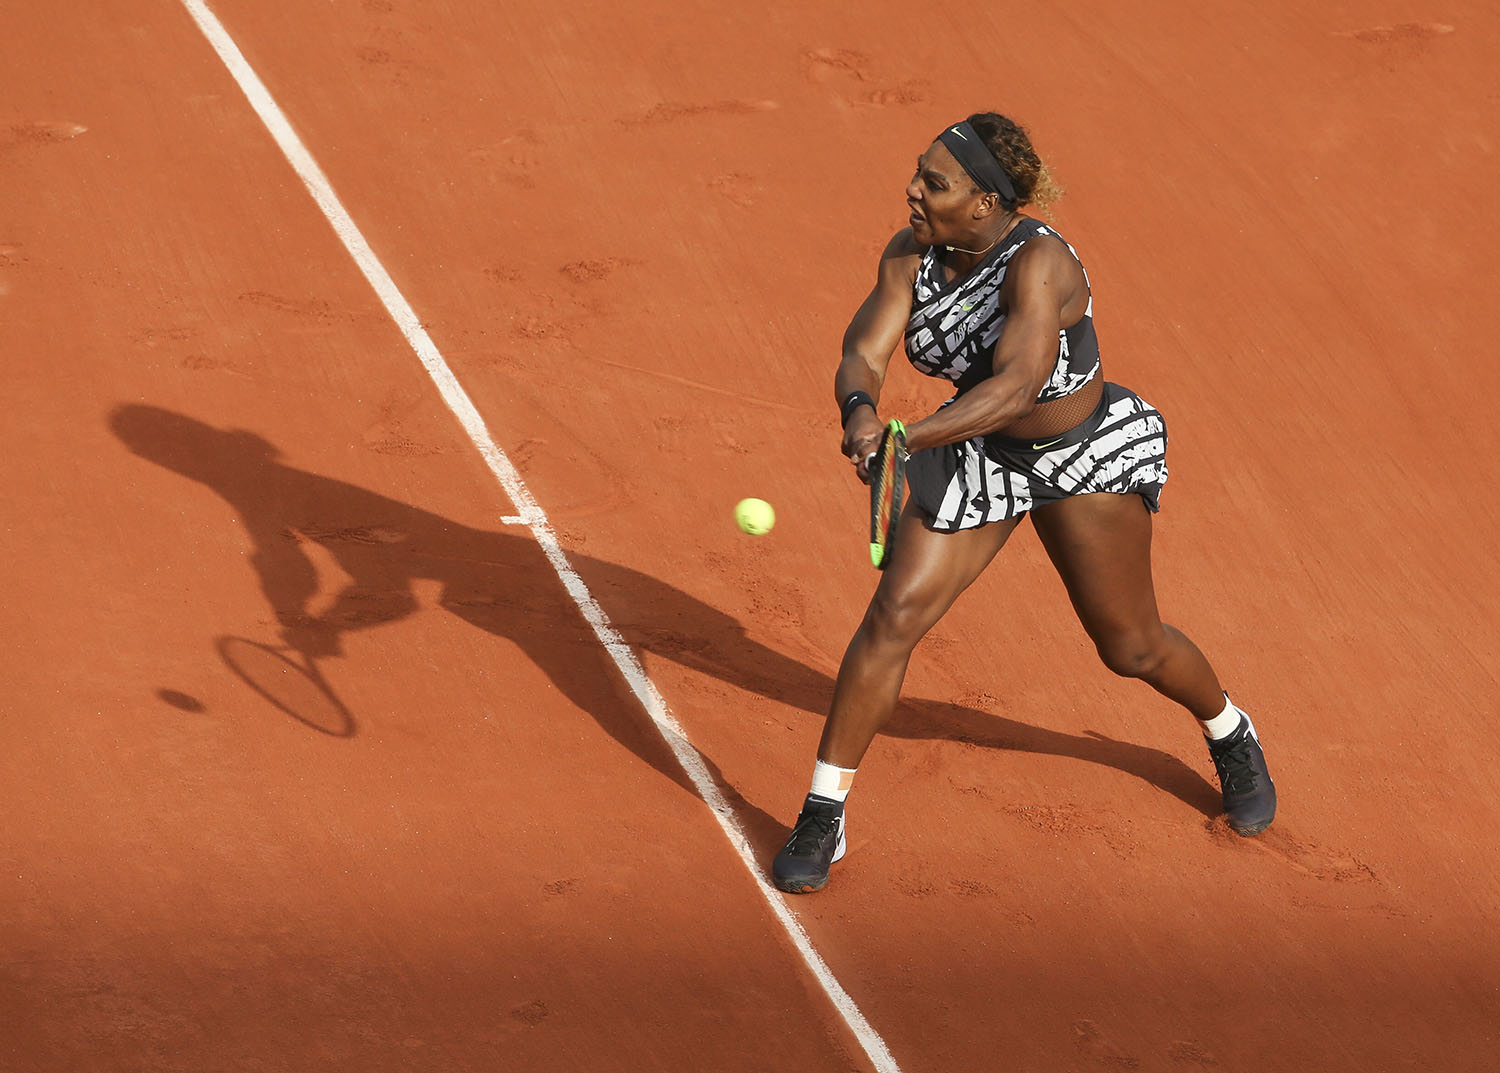 Serena Williams Just Made A Powerful Feminist Fashion Statement